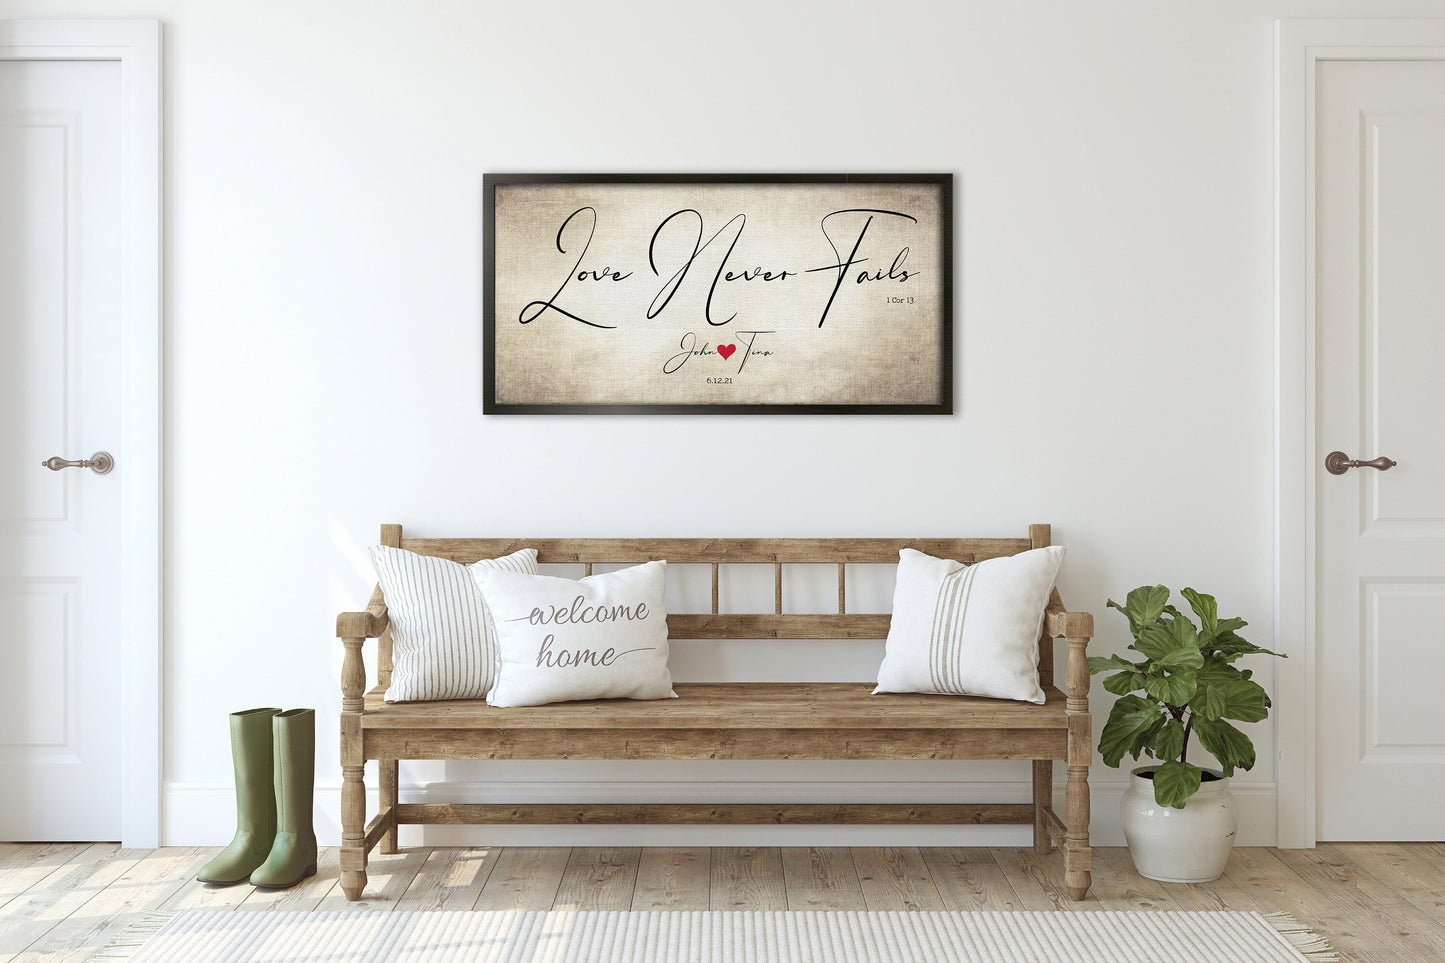 1 Cor 13 Canvas, Anniversary Gift, Love Never Fails, 2 Year Gift, Cotton Canvas, Scripture about Love, Present for Wife, Love is Patient